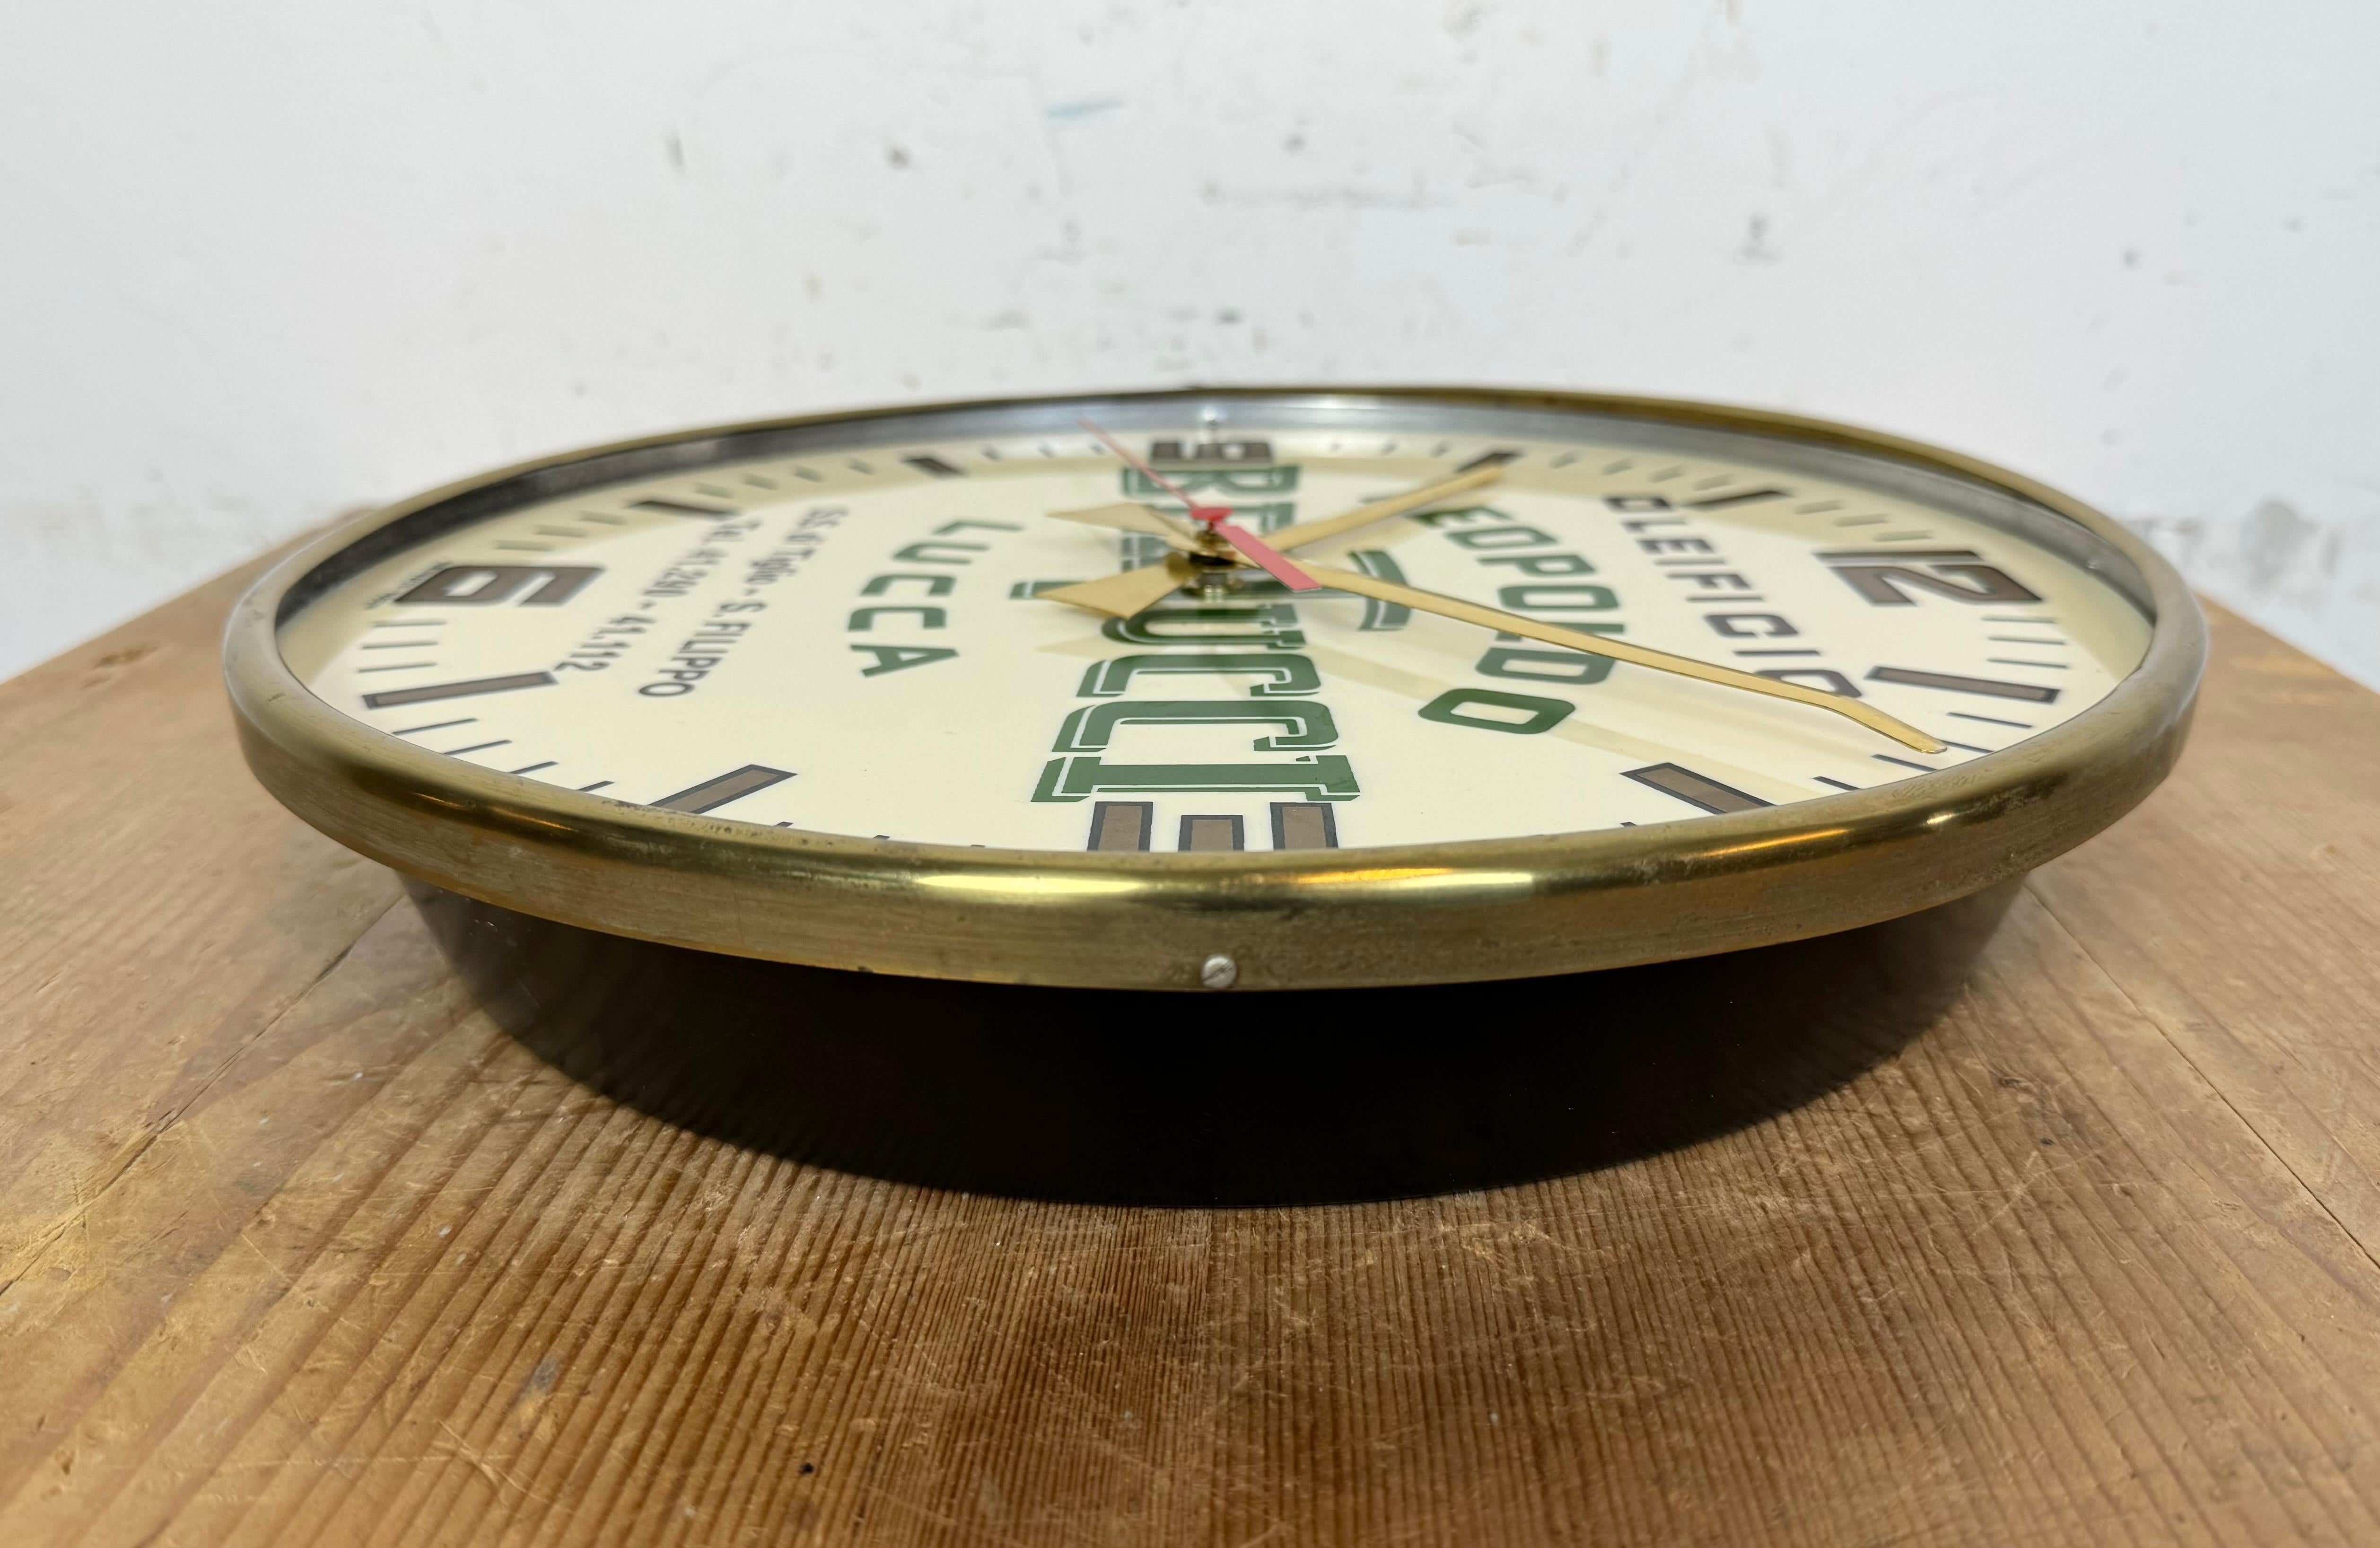 Vintage Italian Advertising Wall Clock, 1970s For Sale 7